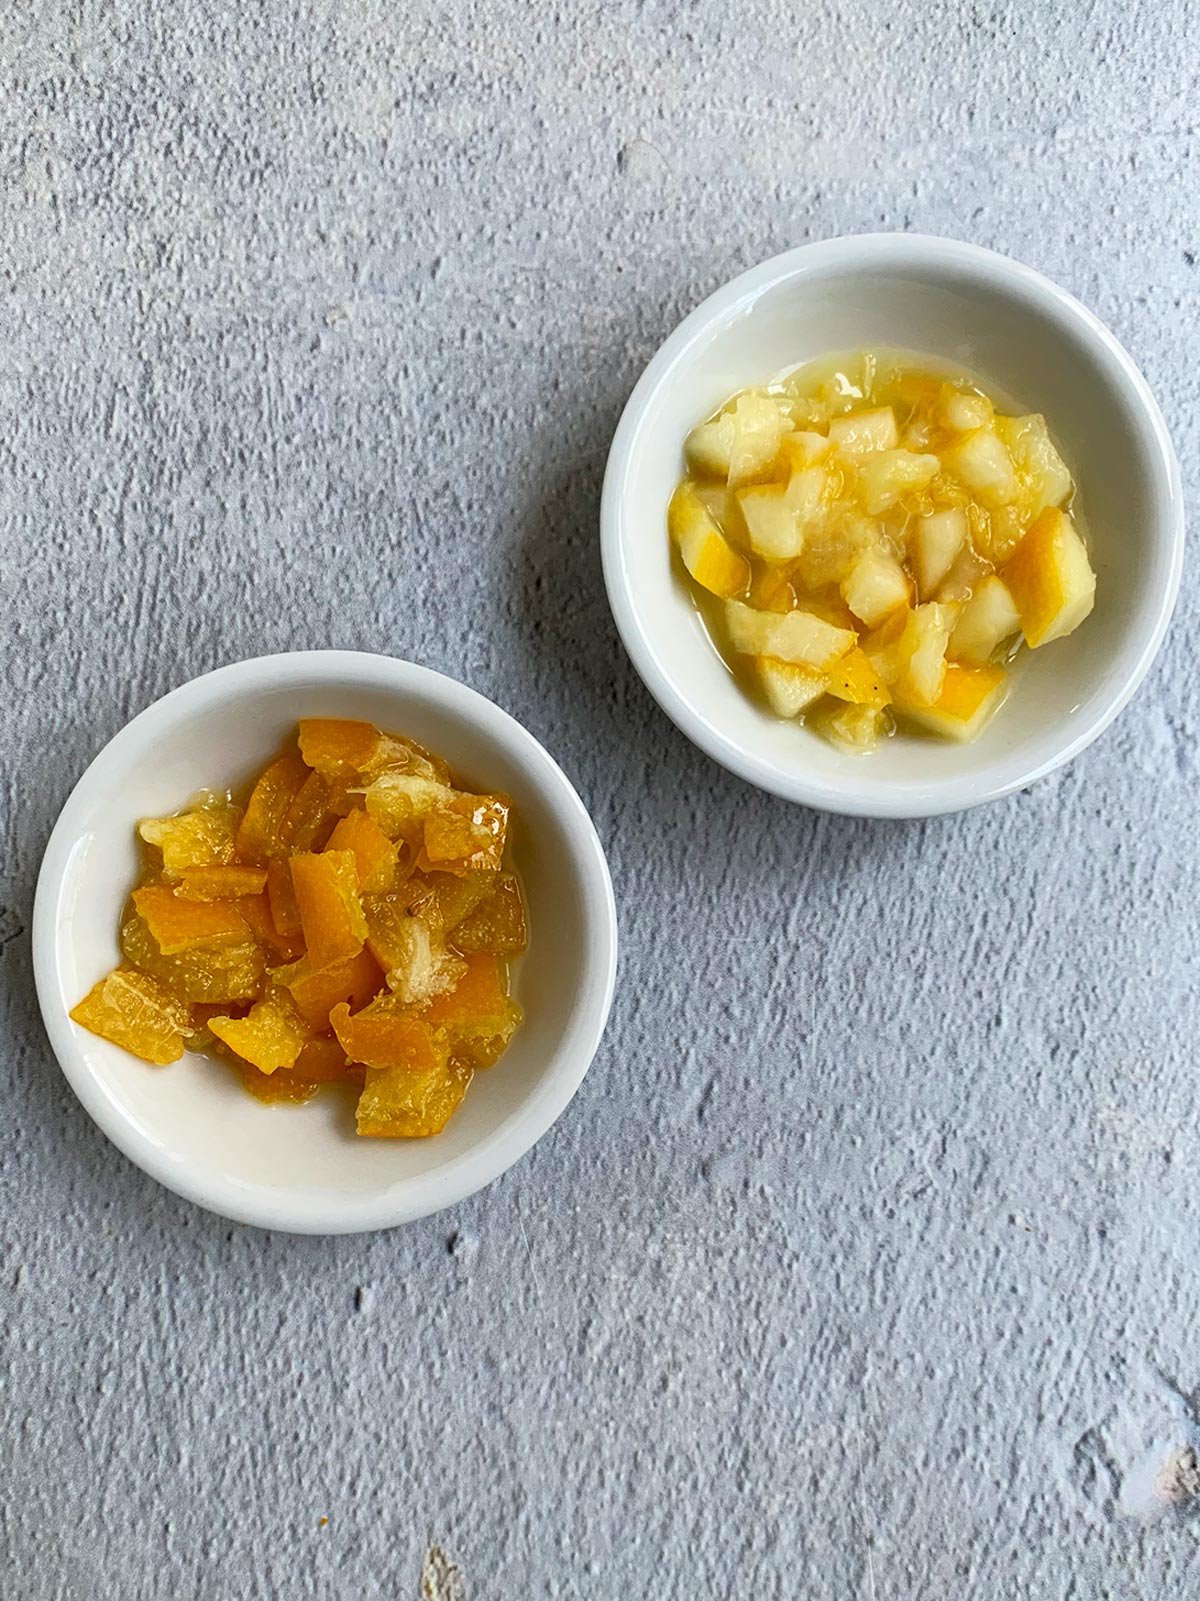 Two small white bowls with regular preserved lemons in one and quick pickled lemons in the other.